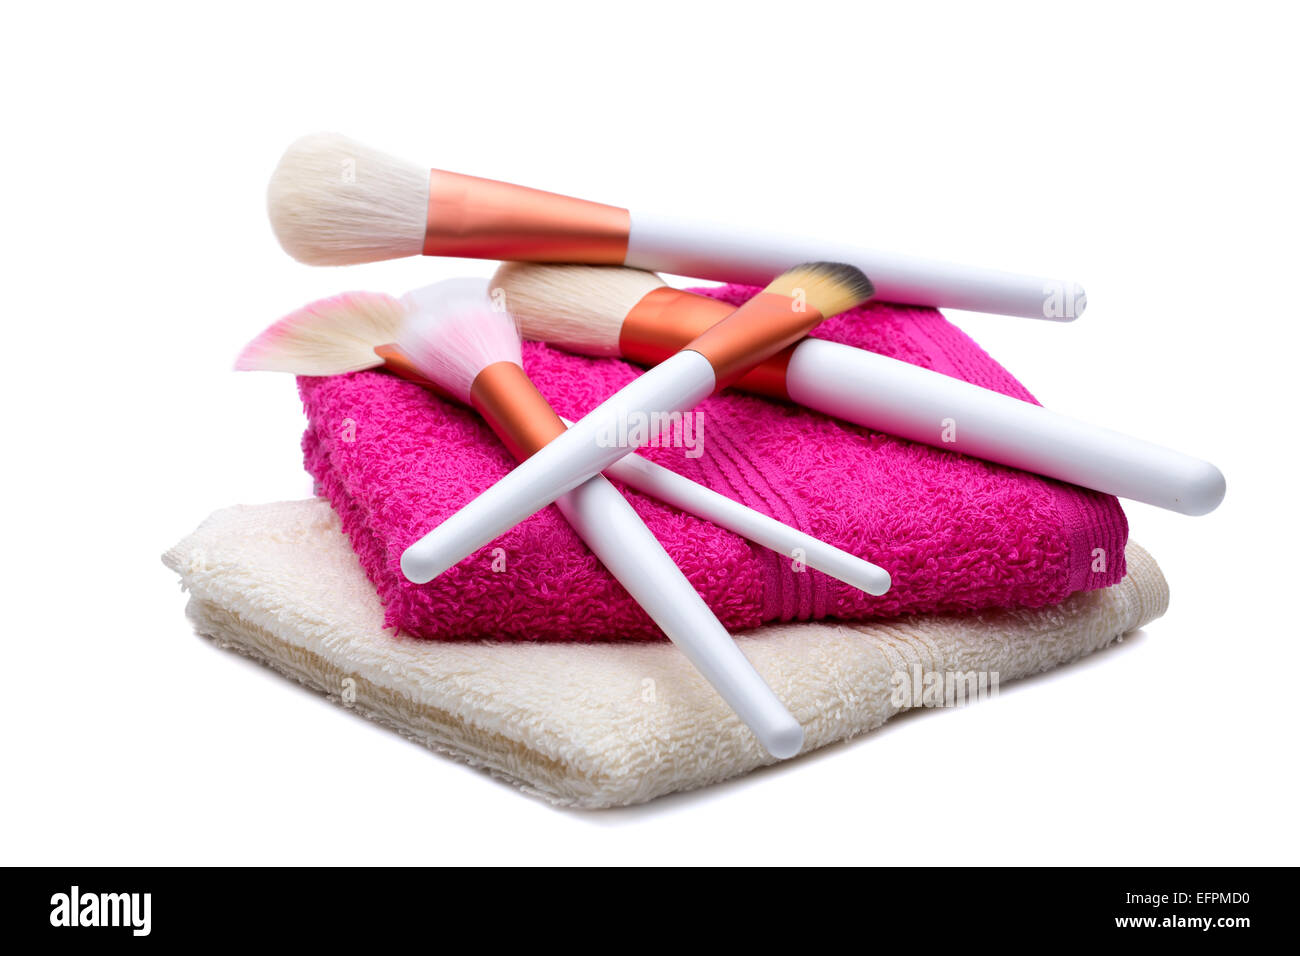 Makeup Brushes on white-pink towel Stock Photo